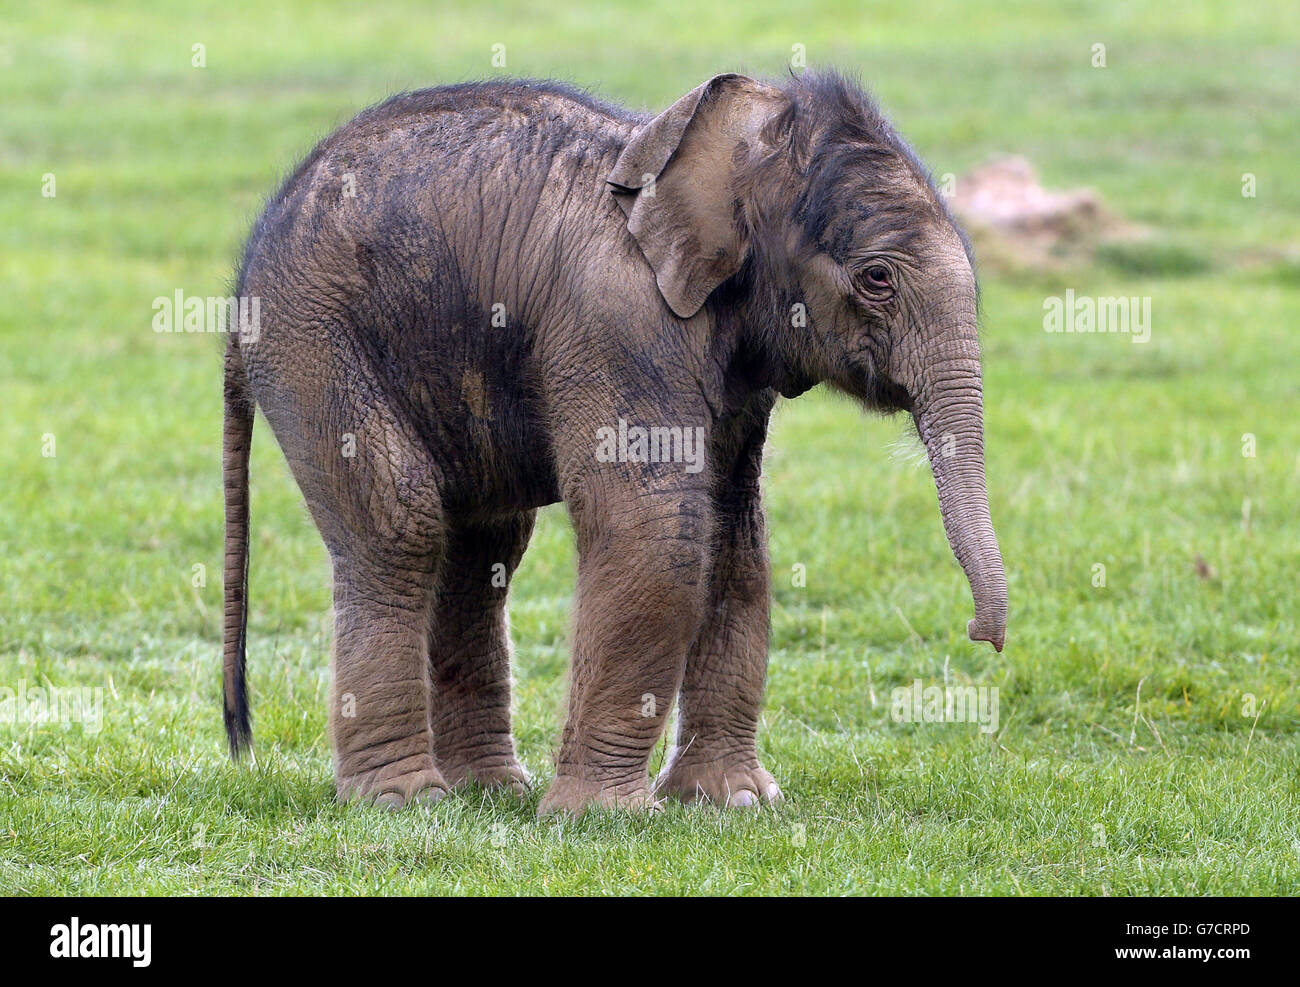 A three day old baby elephant in the elephant paddock at Whipsnade Zoo ...